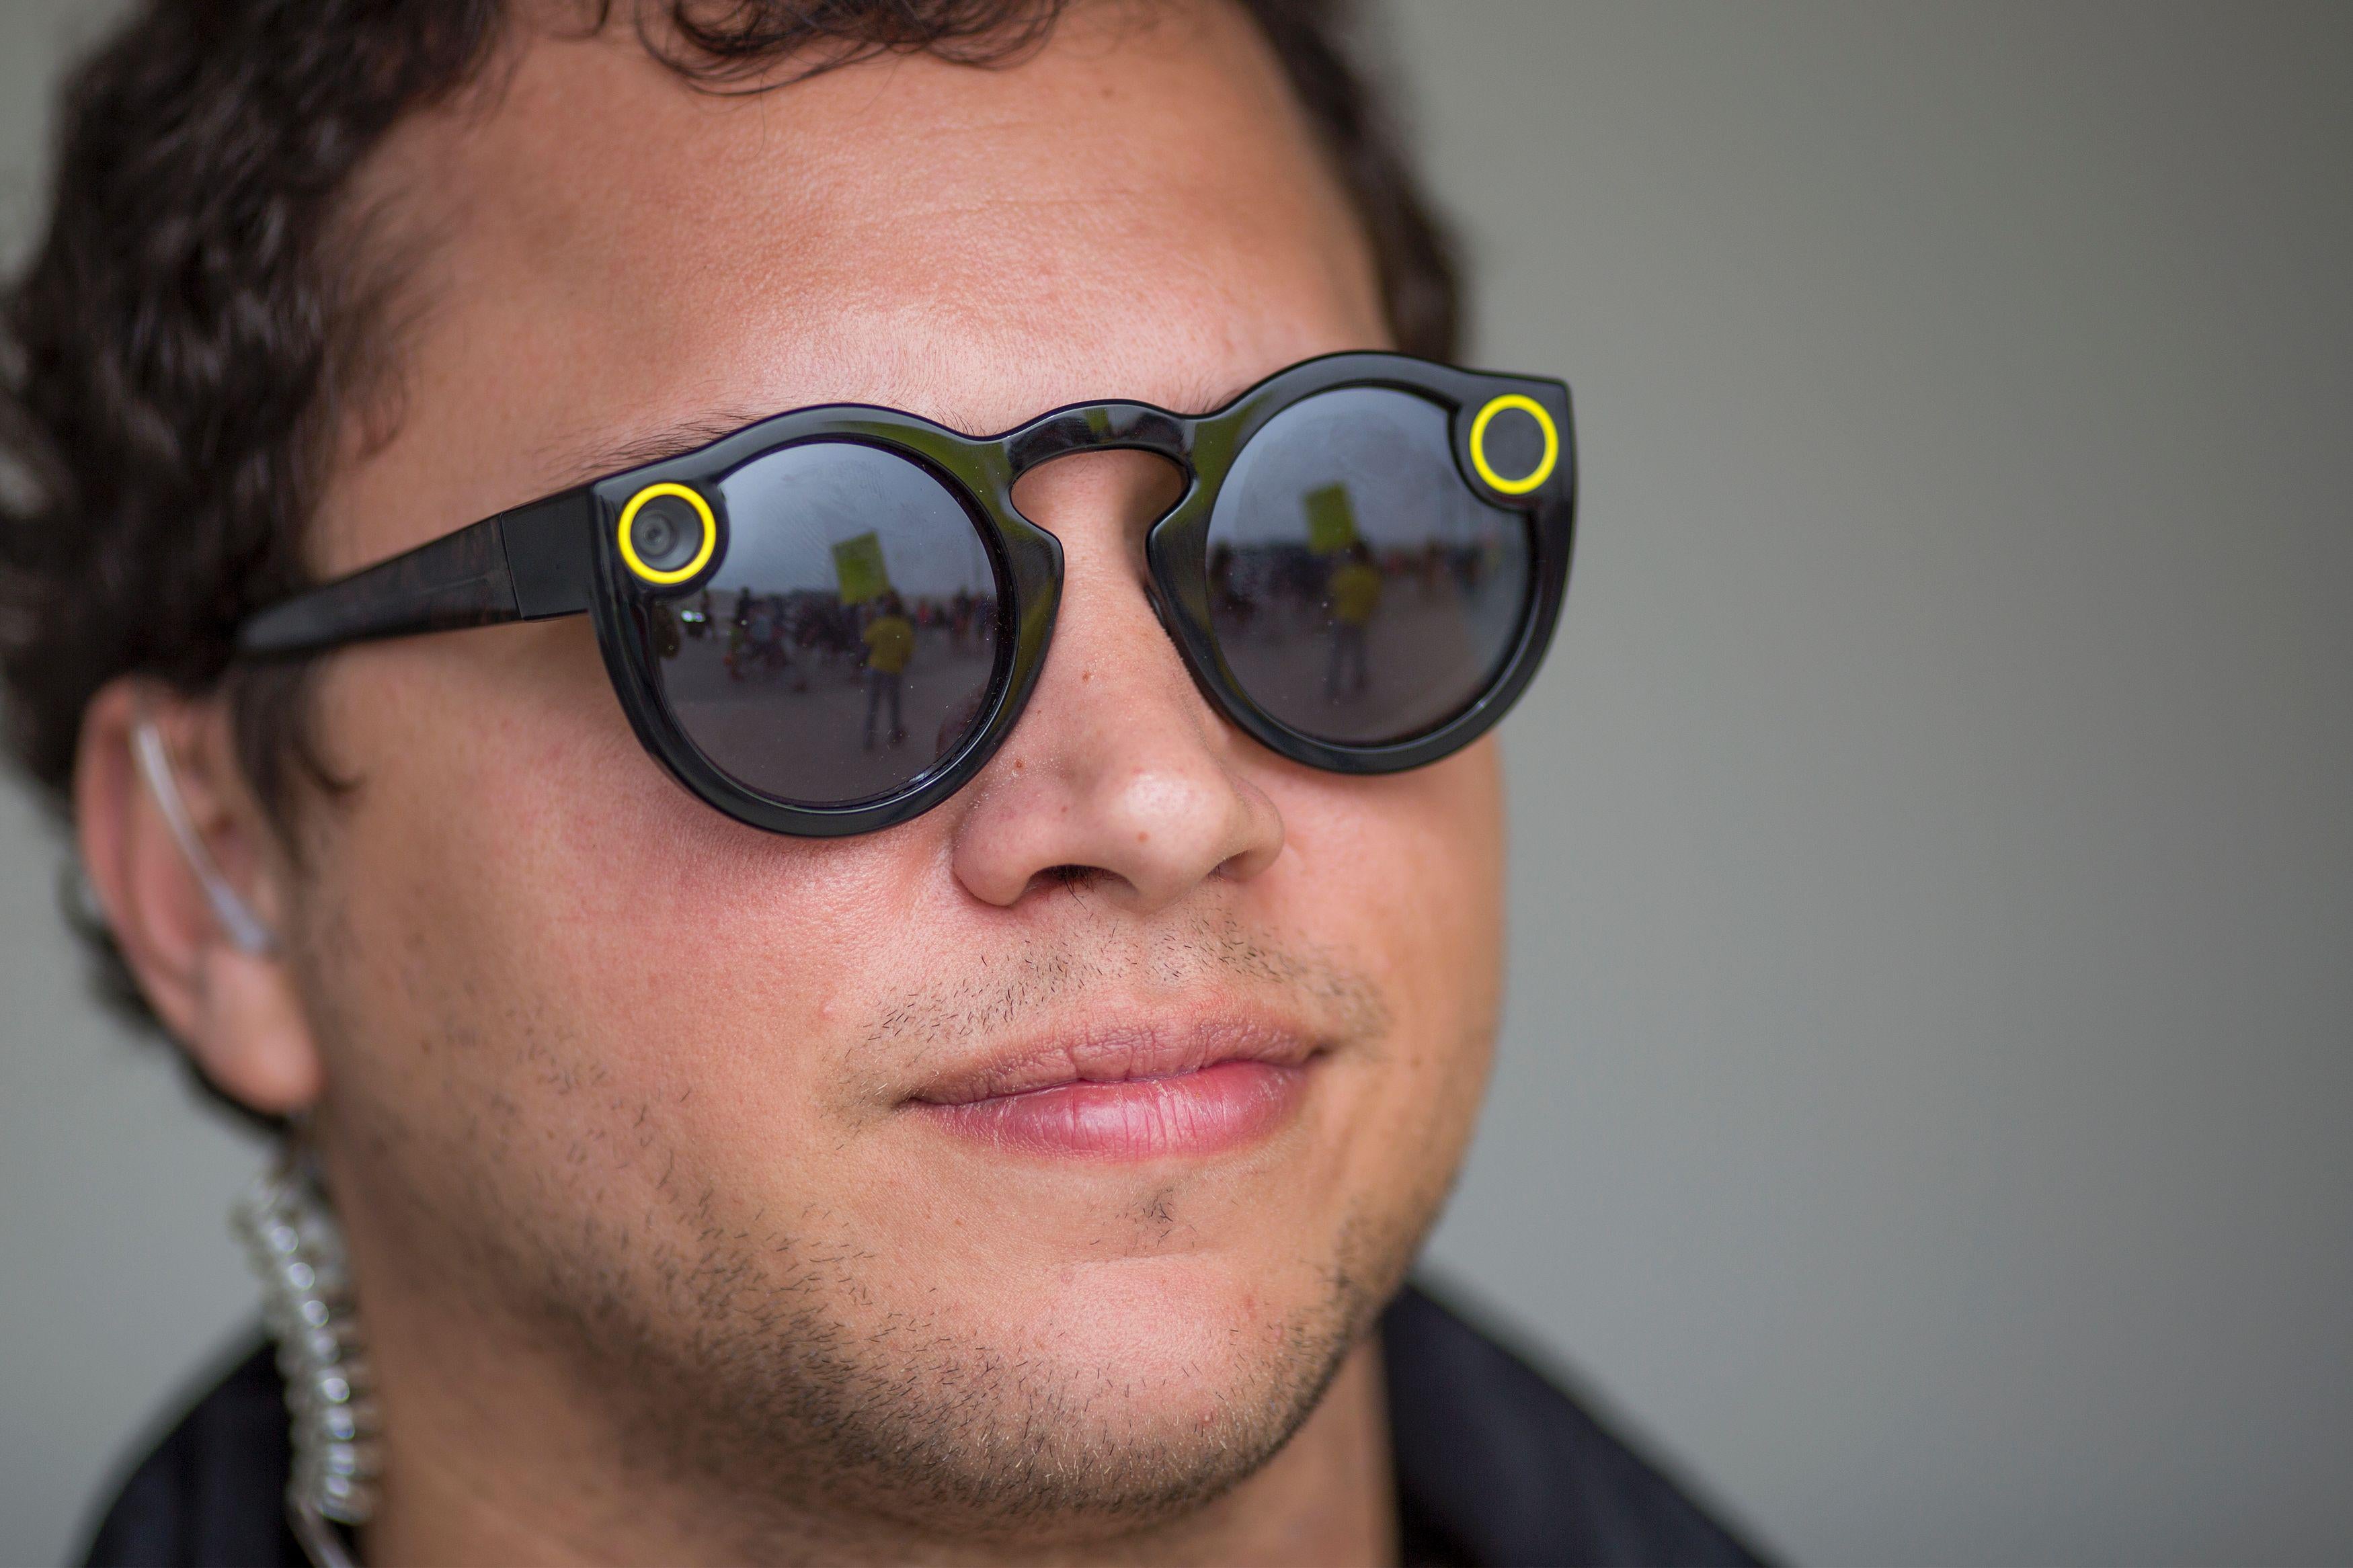 Snap making new Spectacles would be a very Evan Spiegel thing to do.